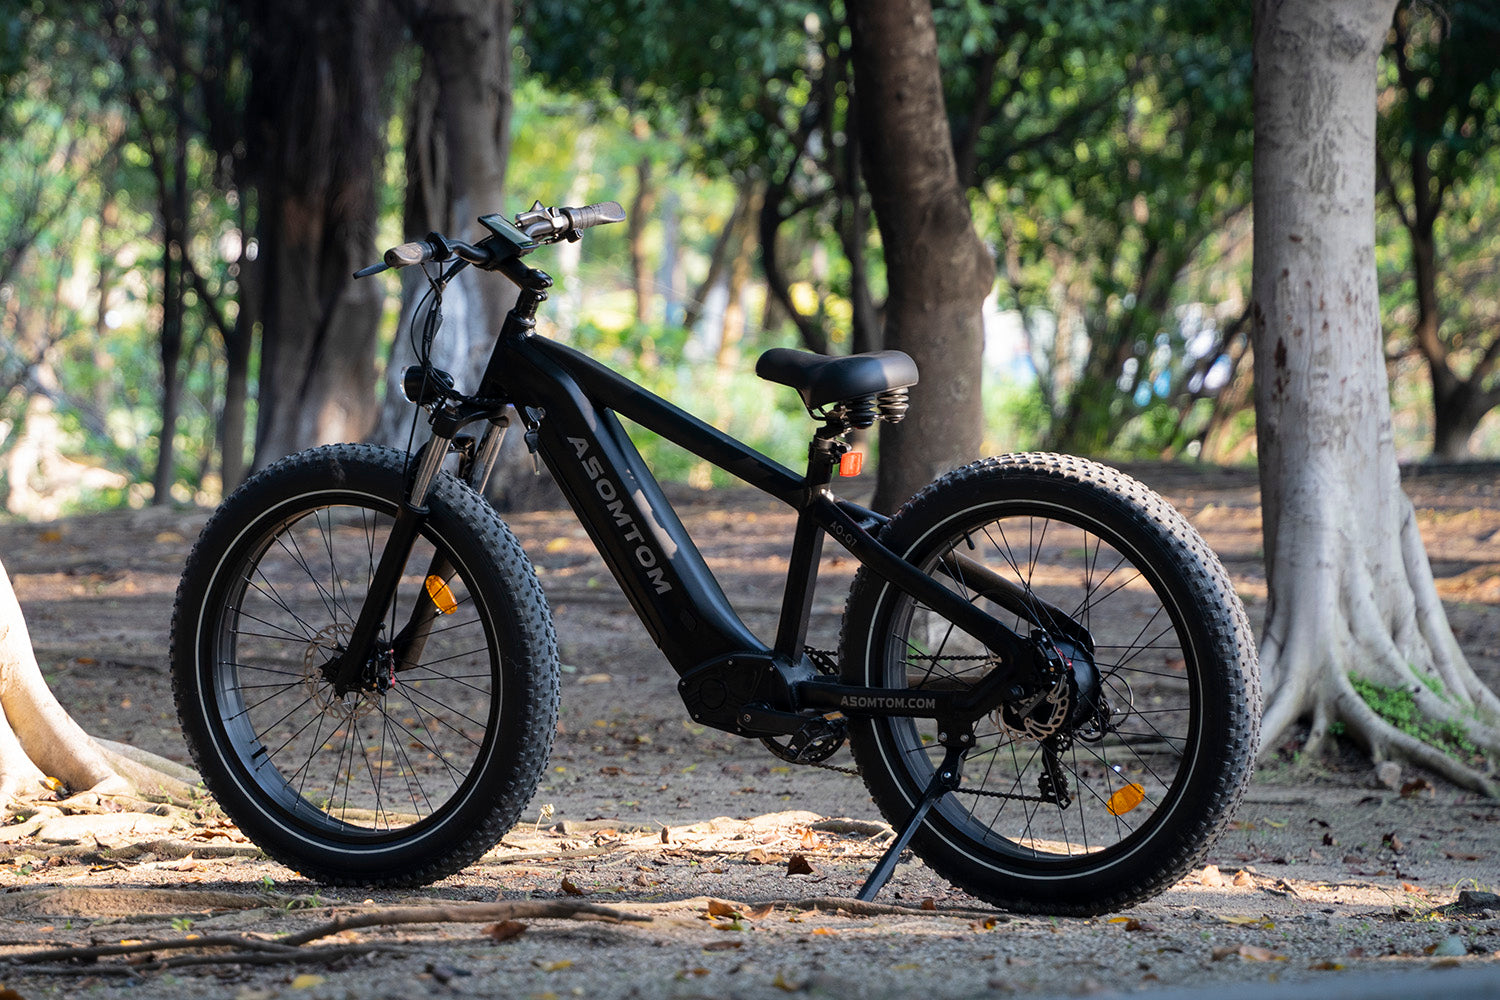 Asomtom Moutain electric bike for adult